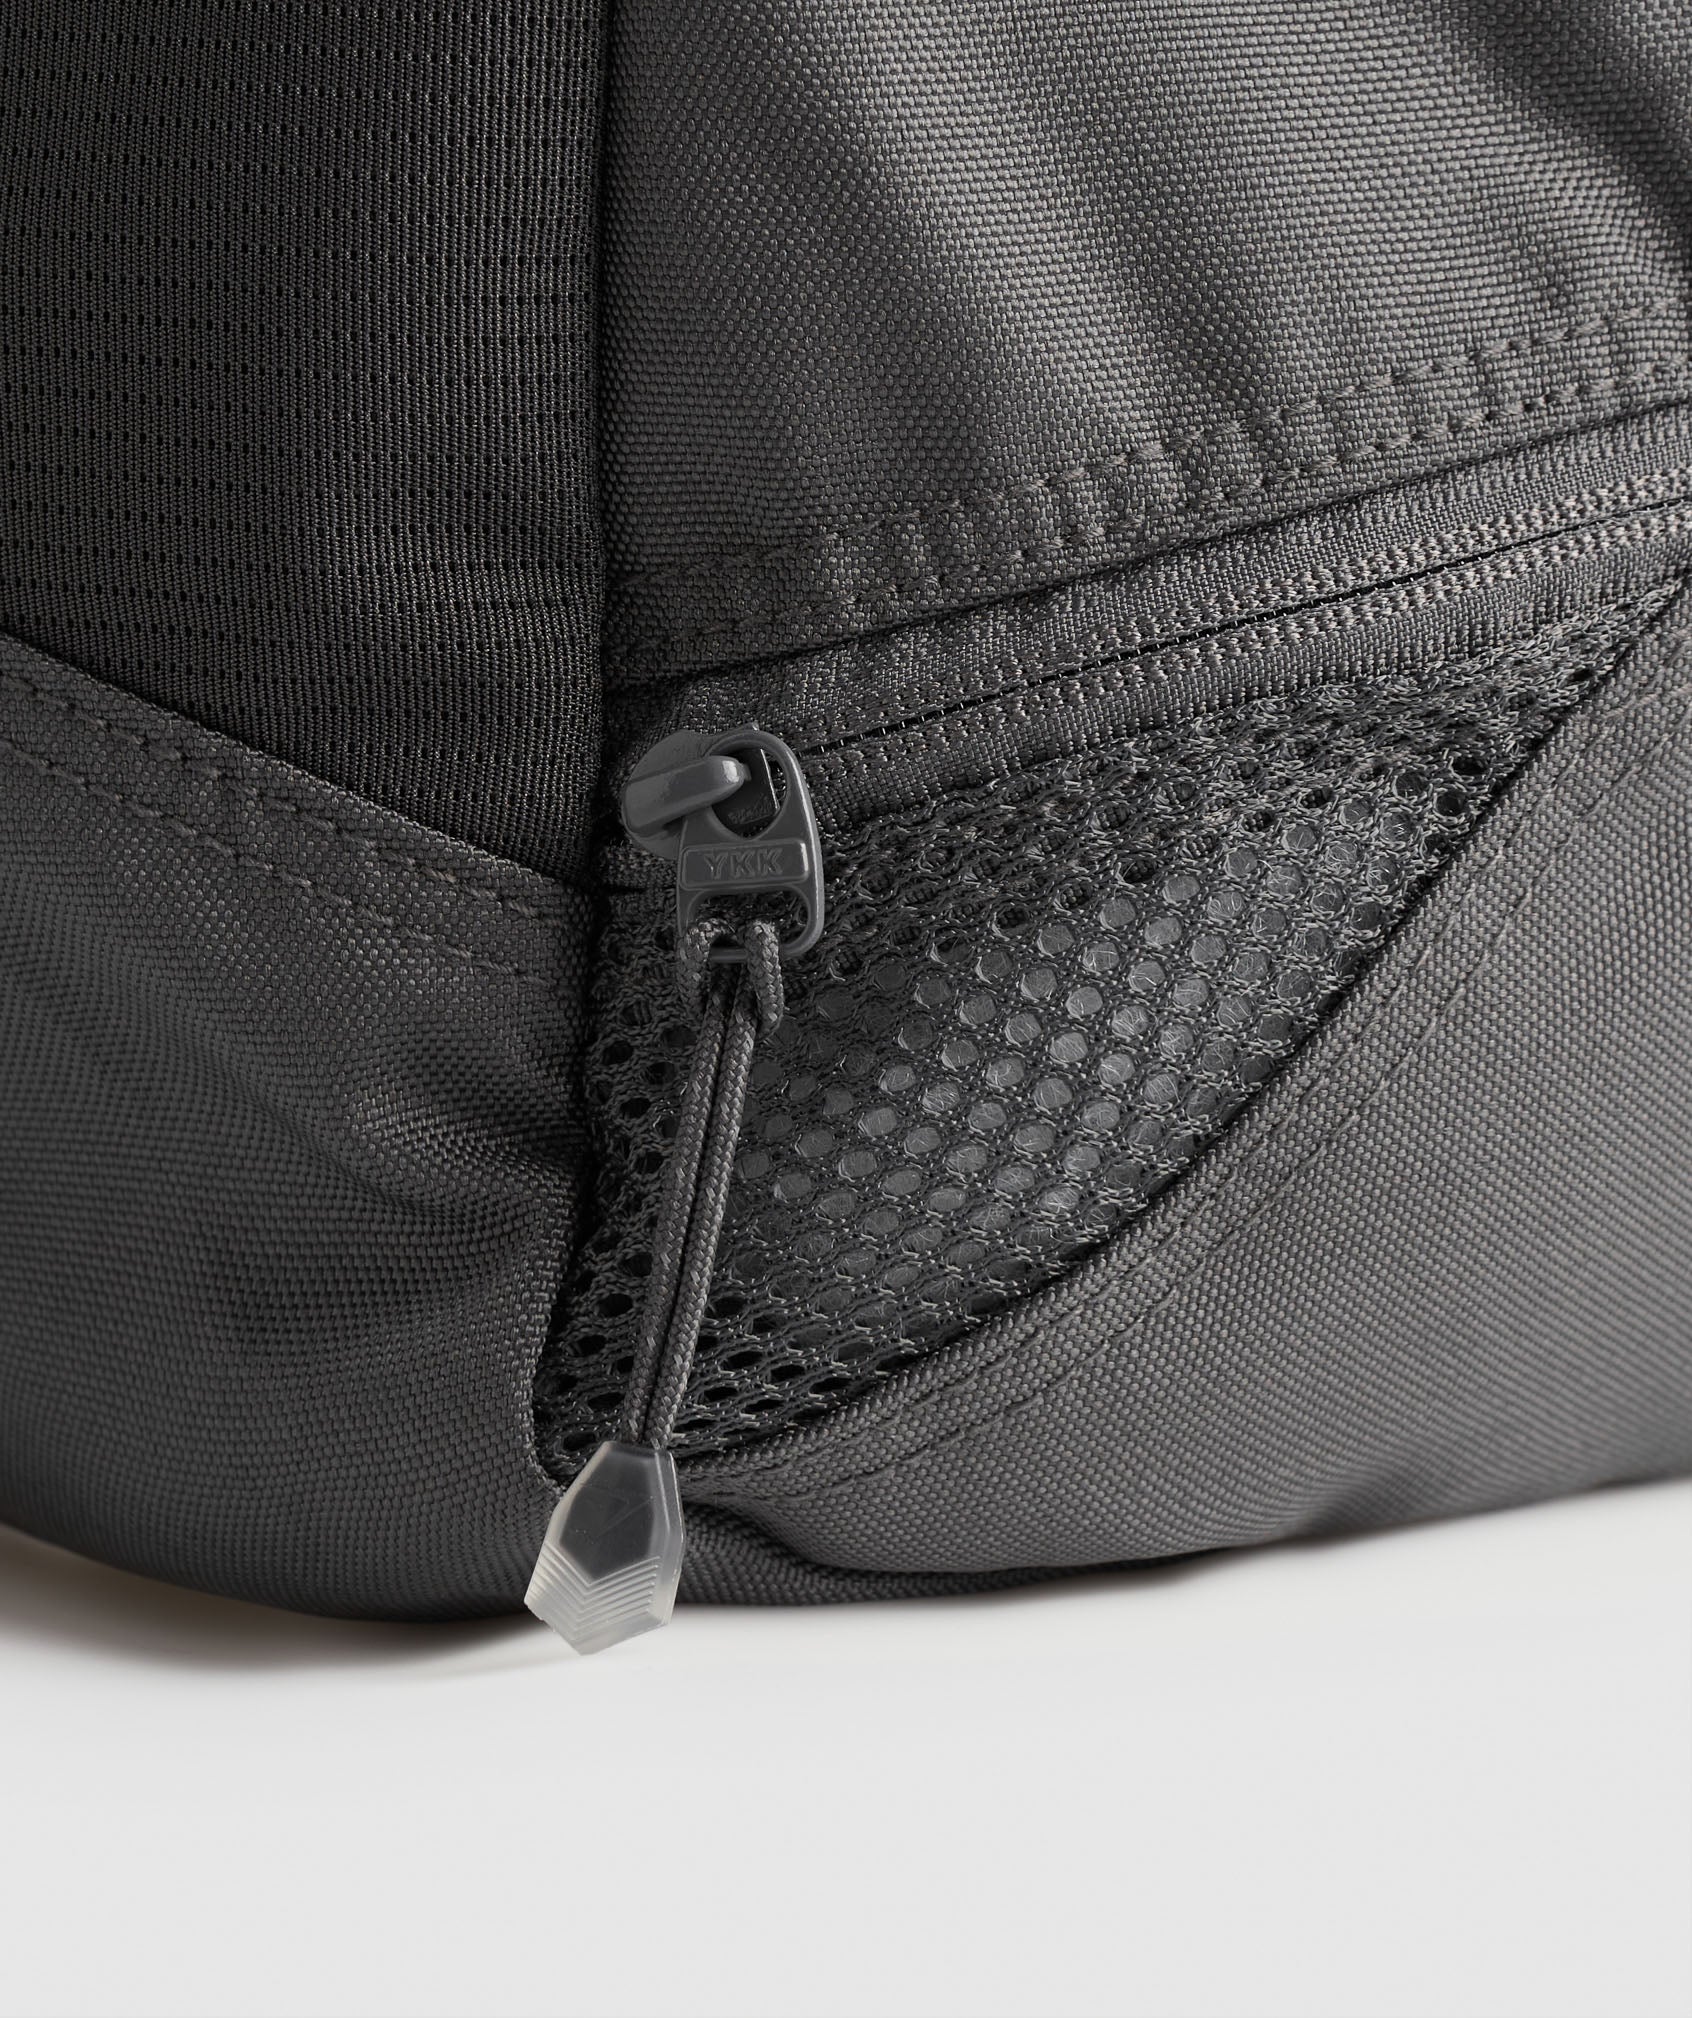 Sharkhead Backpack in Graphite Grey - view 6